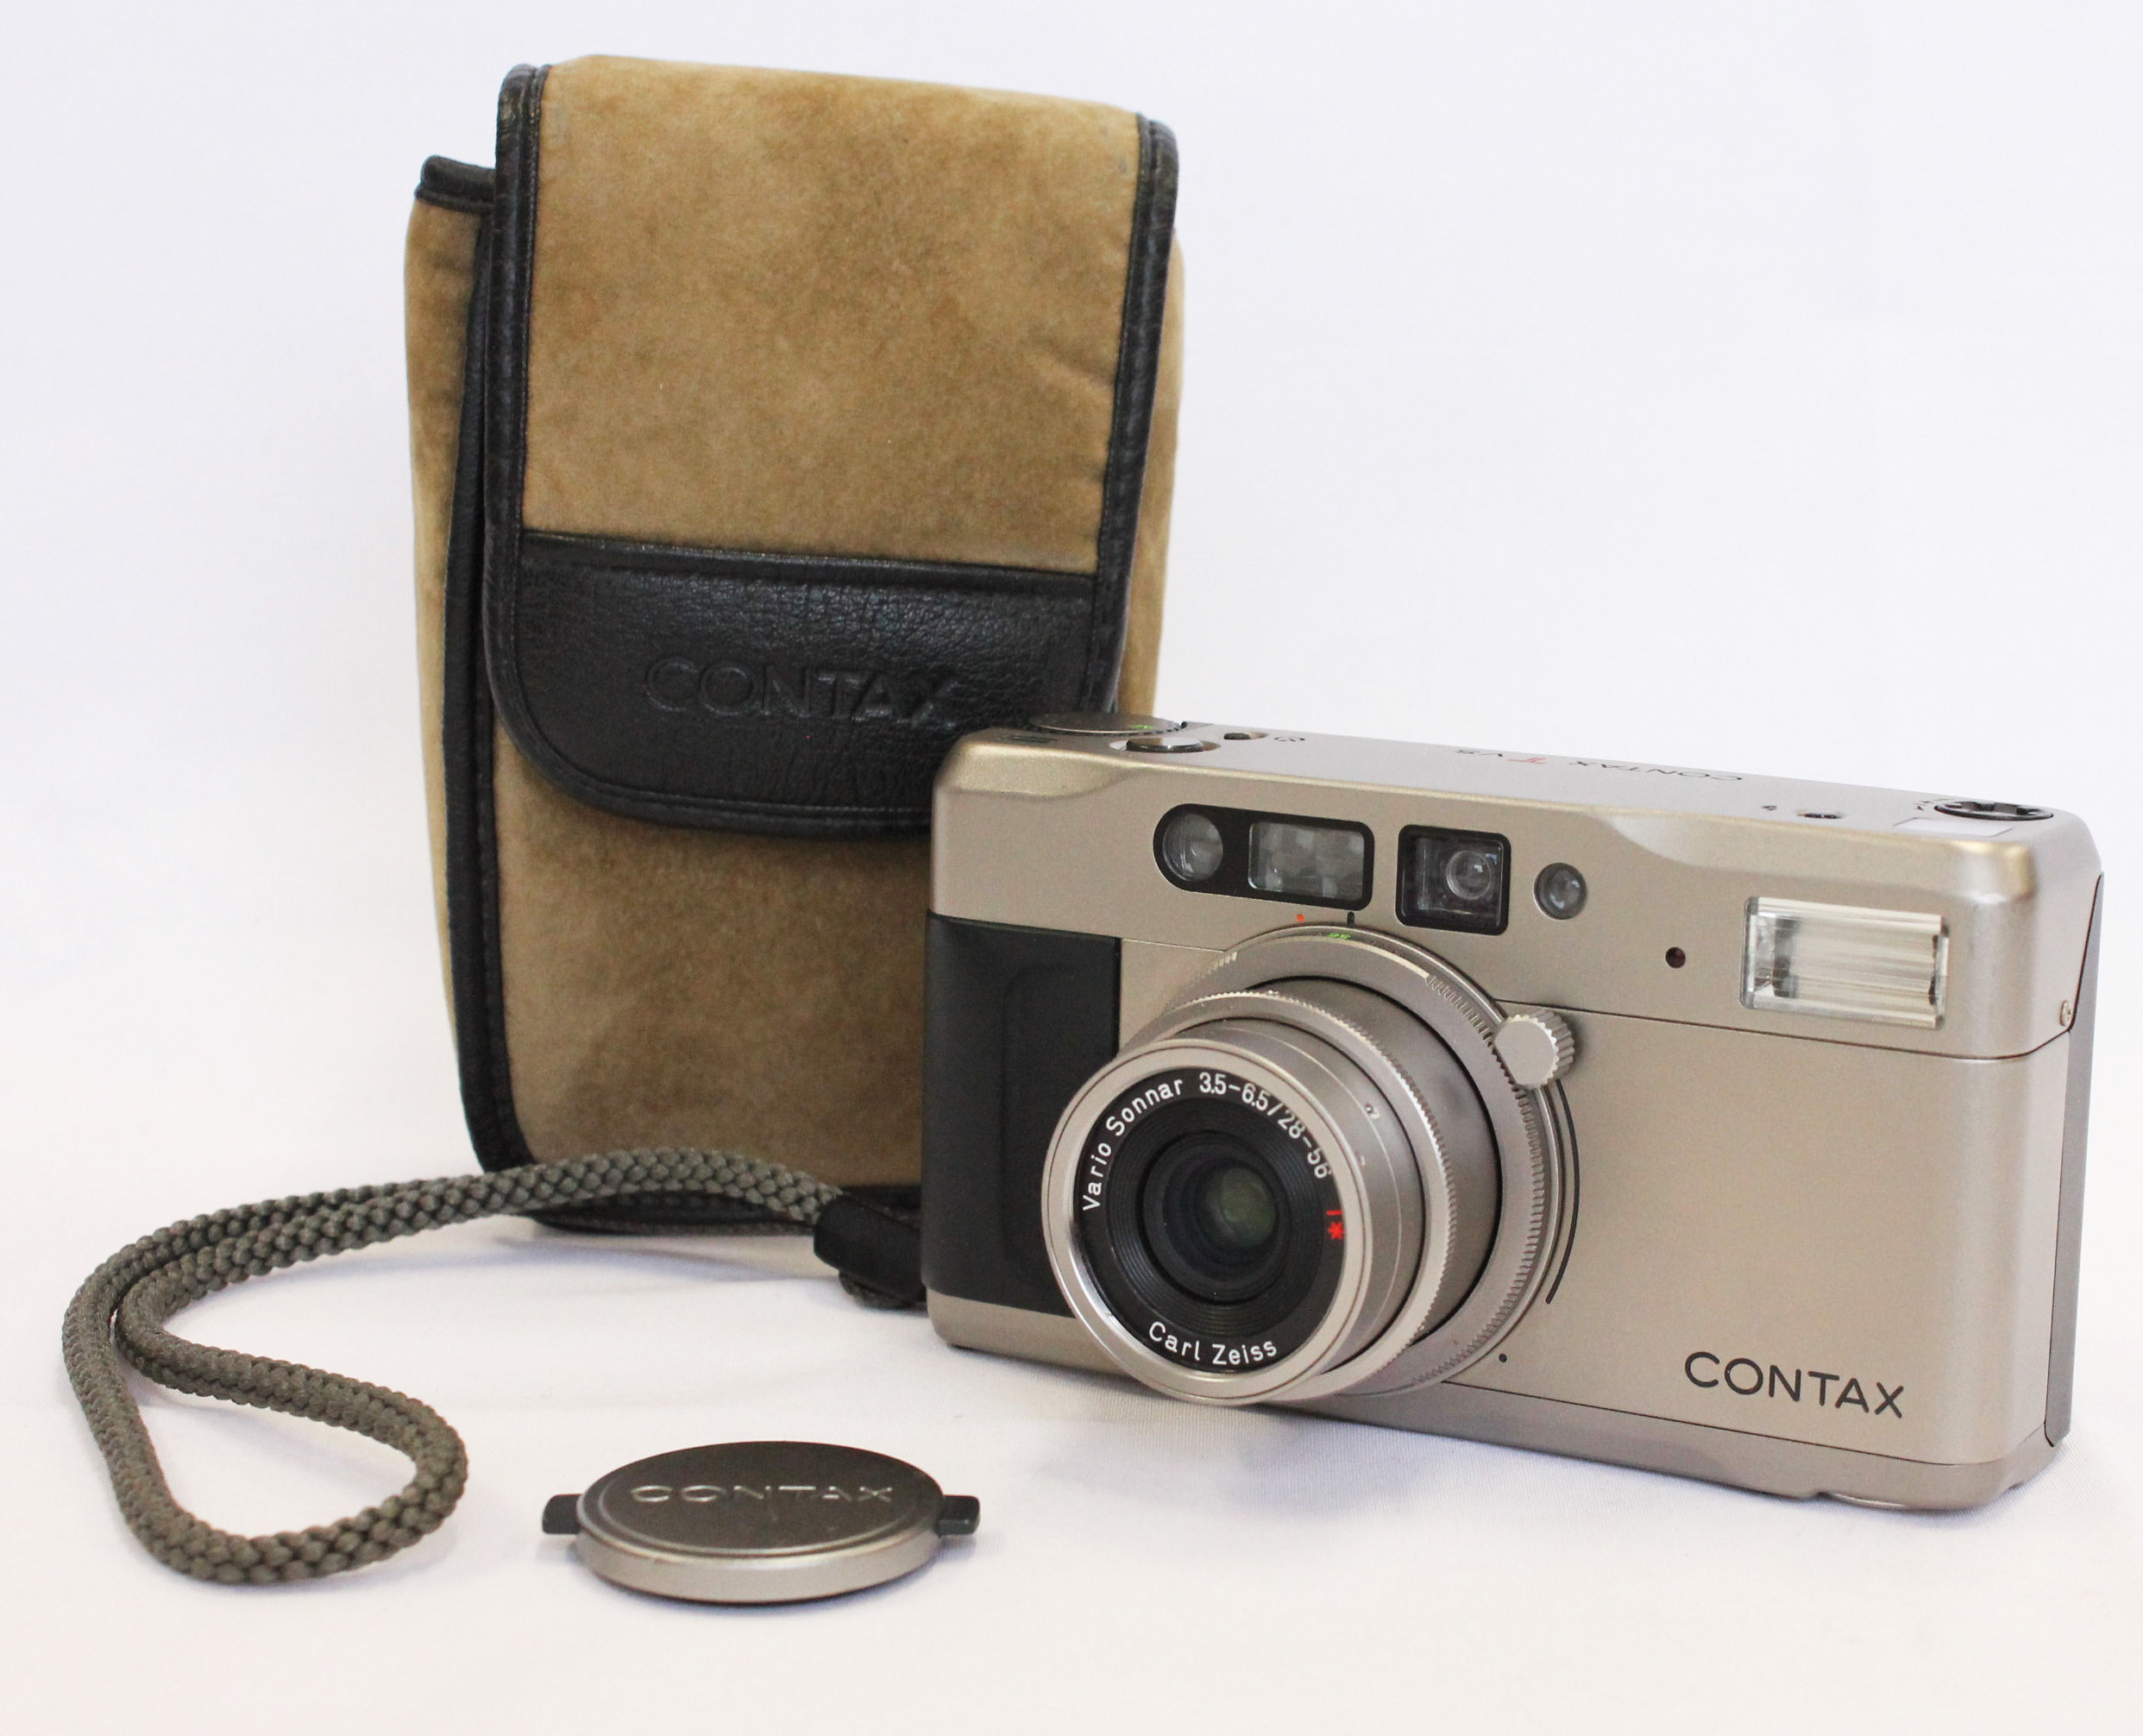 Japan Used Camera Shop | [Near Mint] Contax TVS 35mm Point & Shoot Film Camera with Case from Japan